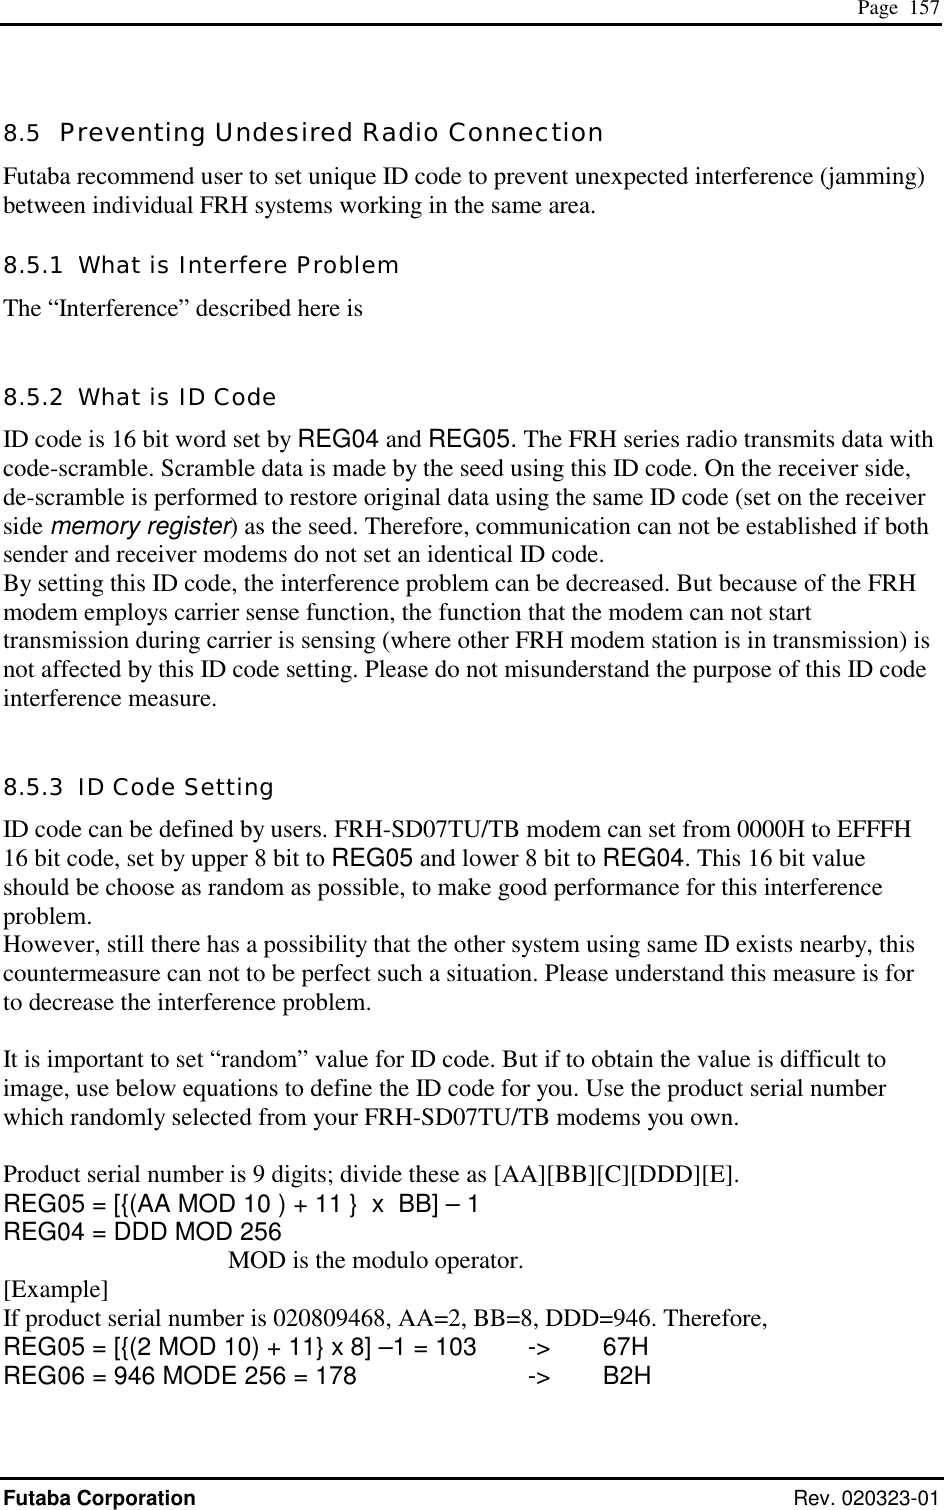  Page  157 Futaba Corporation Rev. 020323-01 8.5  Preventing Undesired Radio Connection Futaba recommend user to set unique ID code to prevent unexpected interference (jamming) between individual FRH systems working in the same area. 8.5.1  What is Interfere Problem The “Interference” described here is   8.5.2  What is ID Code ID code is 16 bit word set by REG04 and REG05. The FRH series radio transmits data with code-scramble. Scramble data is made by the seed using this ID code. On the receiver side, de-scramble is performed to restore original data using the same ID code (set on the receiver side memory register) as the seed. Therefore, communication can not be established if both sender and receiver modems do not set an identical ID code. By setting this ID code, the interference problem can be decreased. But because of the FRH modem employs carrier sense function, the function that the modem can not start transmission during carrier is sensing (where other FRH modem station is in transmission) is not affected by this ID code setting. Please do not misunderstand the purpose of this ID code interference measure.  8.5.3  ID Code Setting ID code can be defined by users. FRH-SD07TU/TB modem can set from 0000H to EFFFH 16 bit code, set by upper 8 bit to REG05 and lower 8 bit to REG04. This 16 bit value should be choose as random as possible, to make good performance for this interference problem. However, still there has a possibility that the other system using same ID exists nearby, this countermeasure can not to be perfect such a situation. Please understand this measure is for to decrease the interference problem.  It is important to set “random” value for ID code. But if to obtain the value is difficult to image, use below equations to define the ID code for you. Use the product serial number which randomly selected from your FRH-SD07TU/TB modems you own.  Product serial number is 9 digits; divide these as [AA][BB][C][DDD][E]. REG05 = [{(AA MOD 10 ) + 11 }  x  BB] – 1 REG04 = DDD MOD 256 MOD is the modulo operator. [Example] If product serial number is 020809468, AA=2, BB=8, DDD=946. Therefore, REG05 = [{(2 MOD 10) + 11} x 8] –1 = 103   -&gt;   67H REG06 = 946 MODE 256 = 178       -&gt;   B2H  